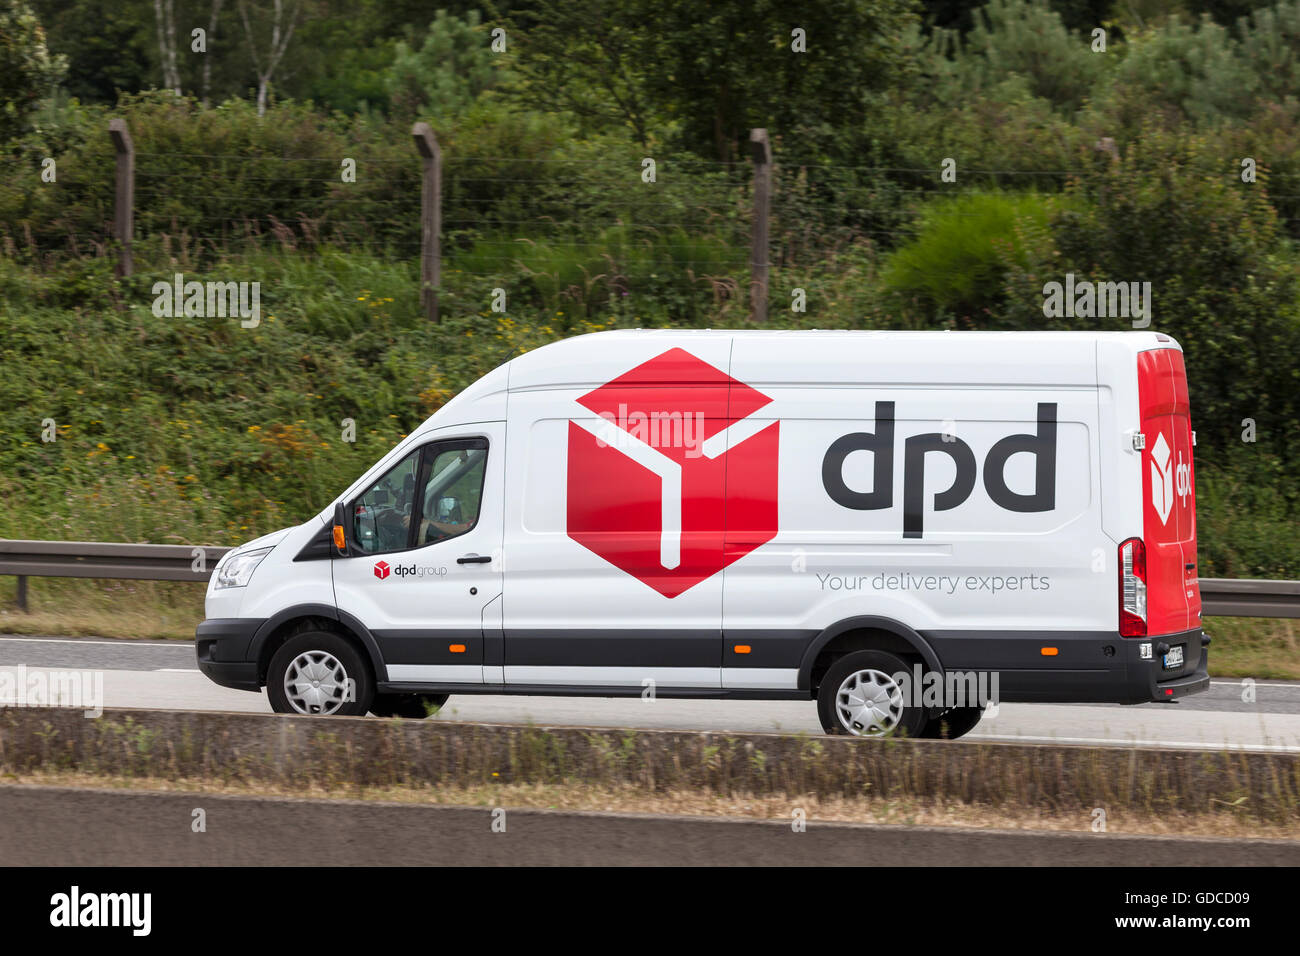 Dpd Van High Resolution Stock Photography and Images - Alamy